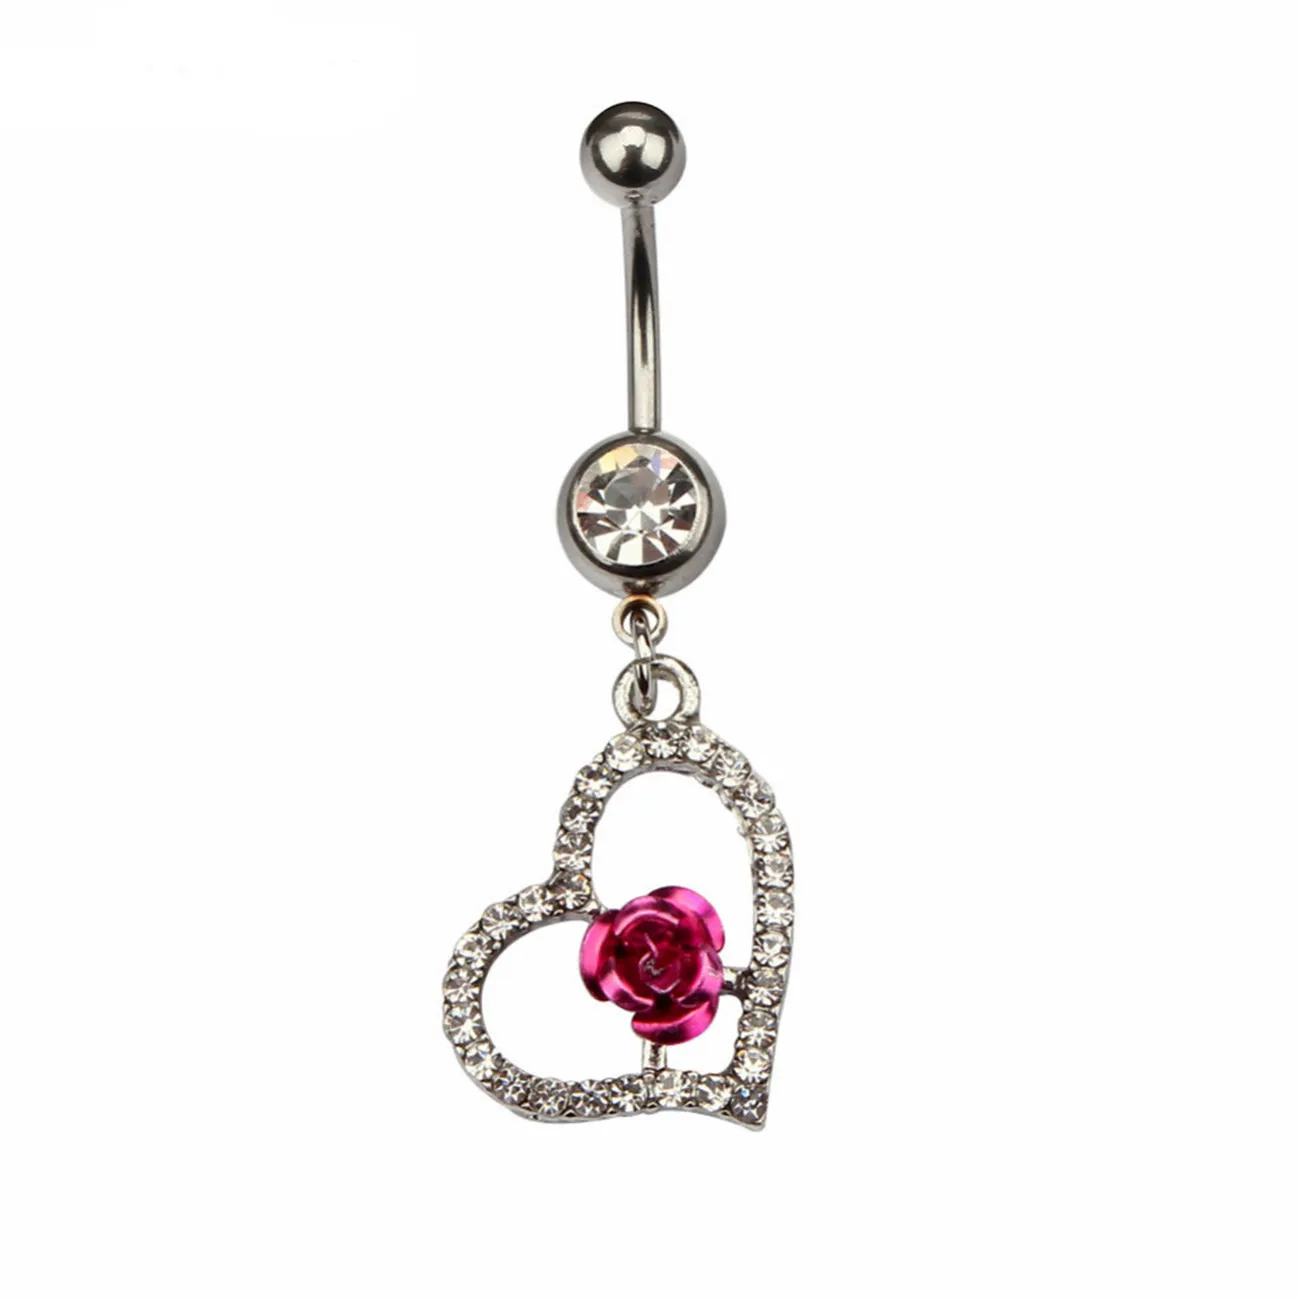 YYJFF D0516 Heart Belly Navel Button Ring